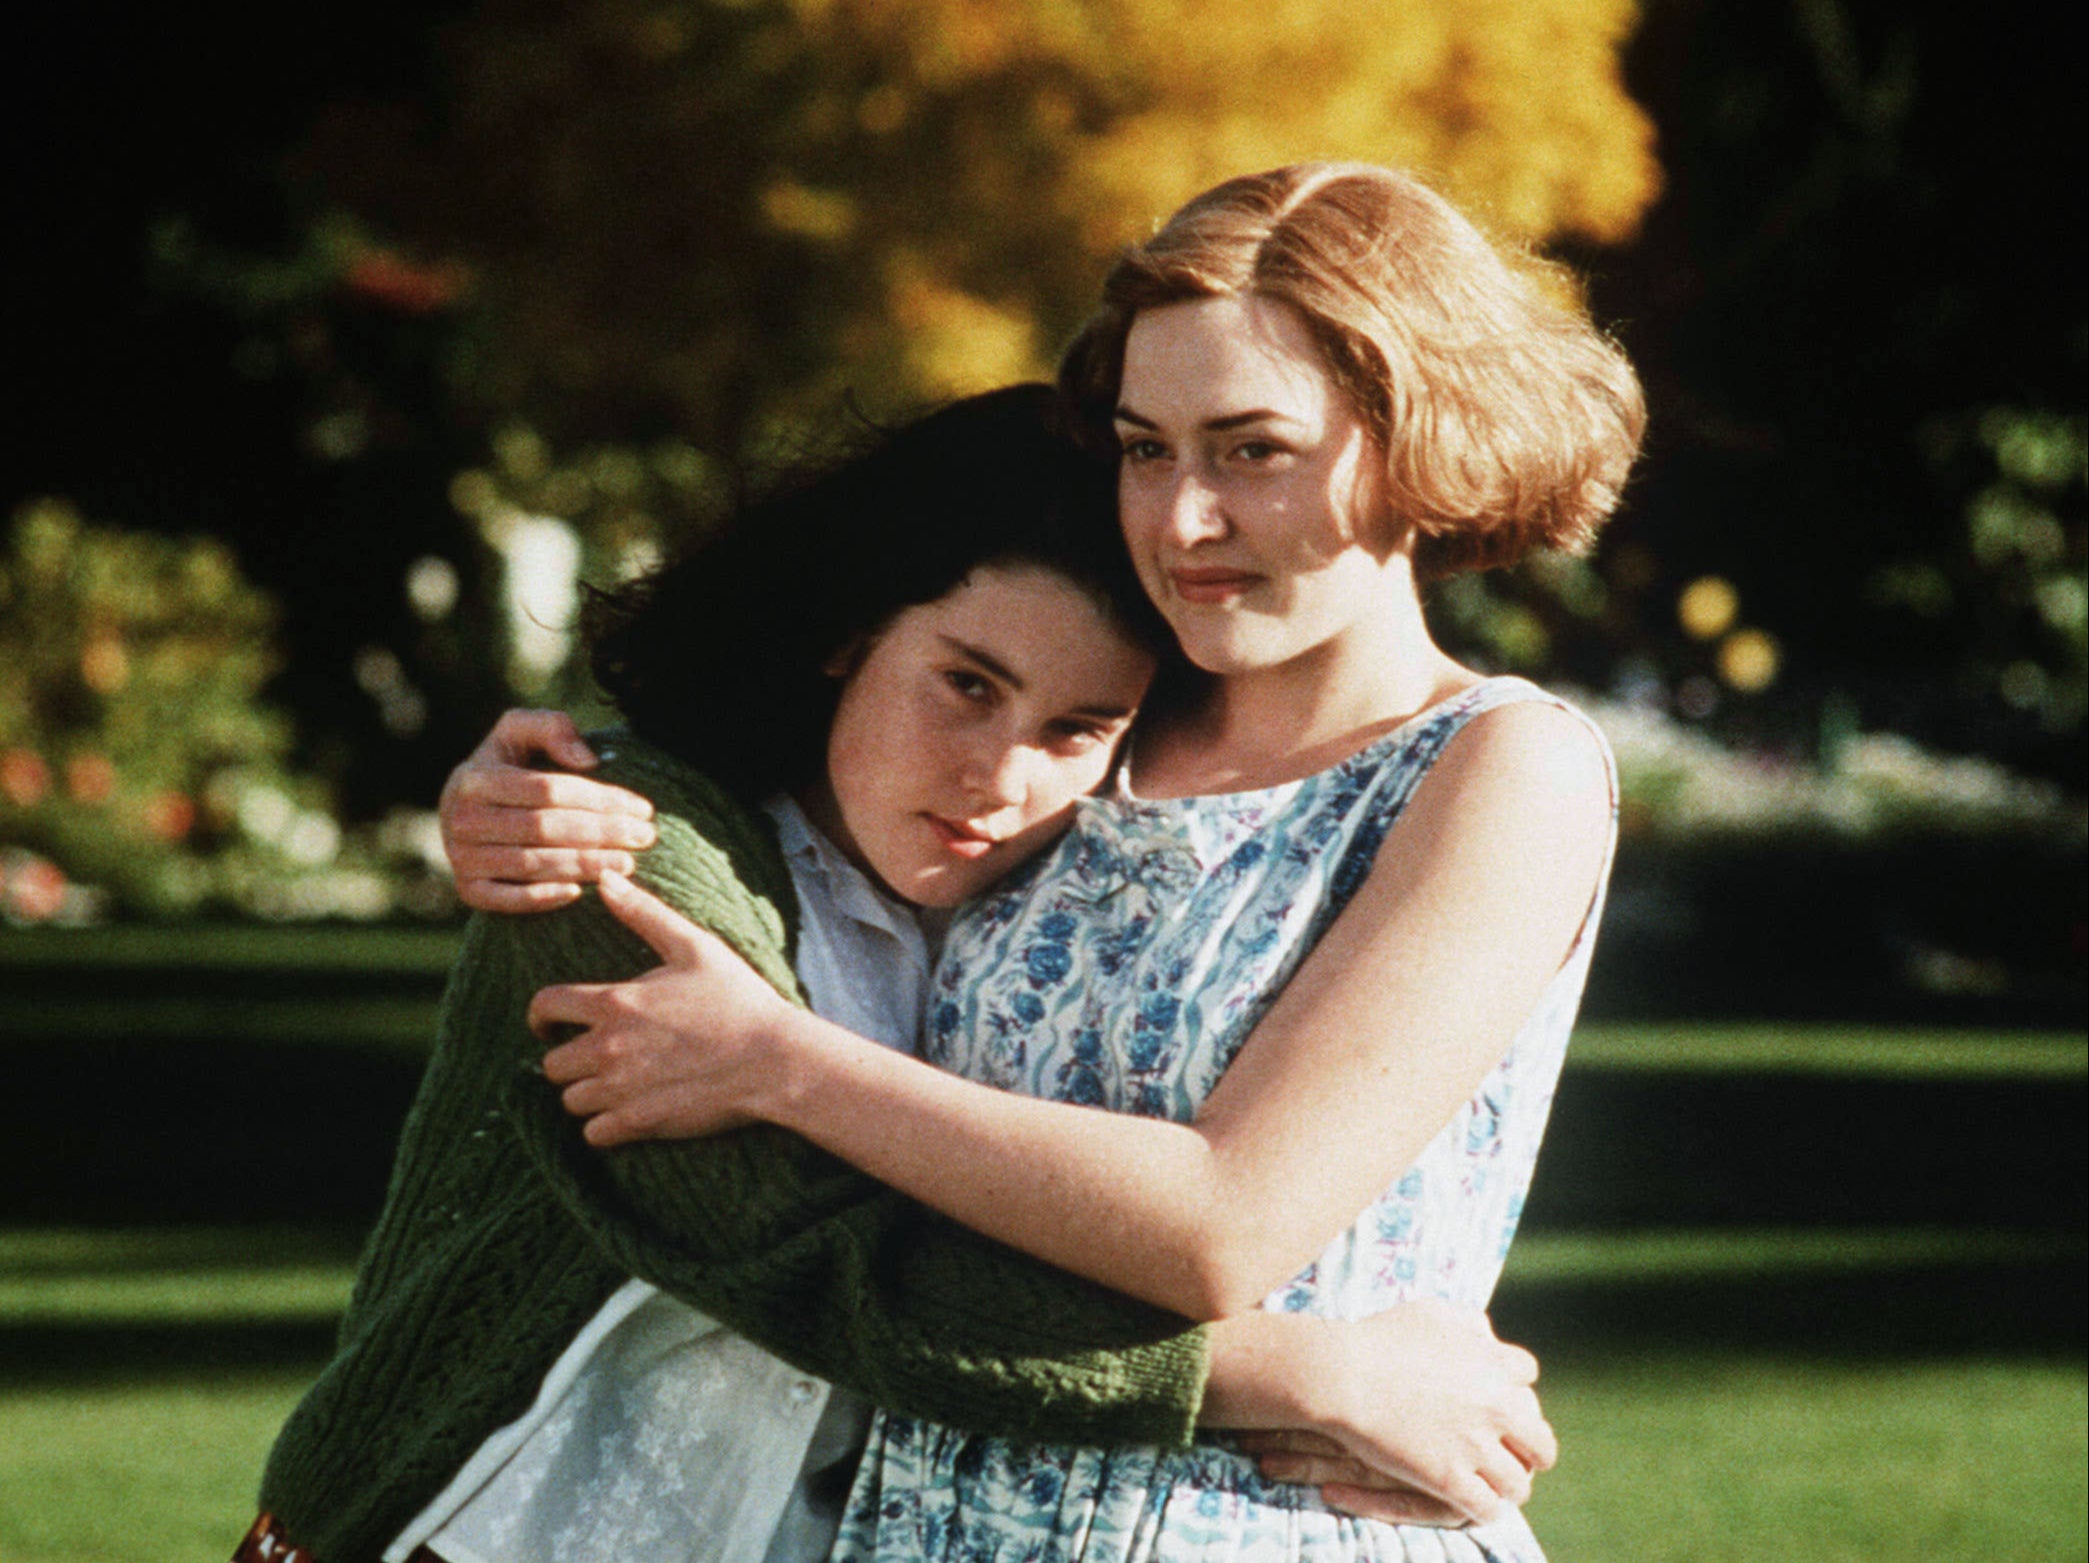 Melanie Lynskey and Kate Winslet made their joint feature debut as murderous best friends in Peter Jackson’s 1994 drama ‘Heavenly Creatures’